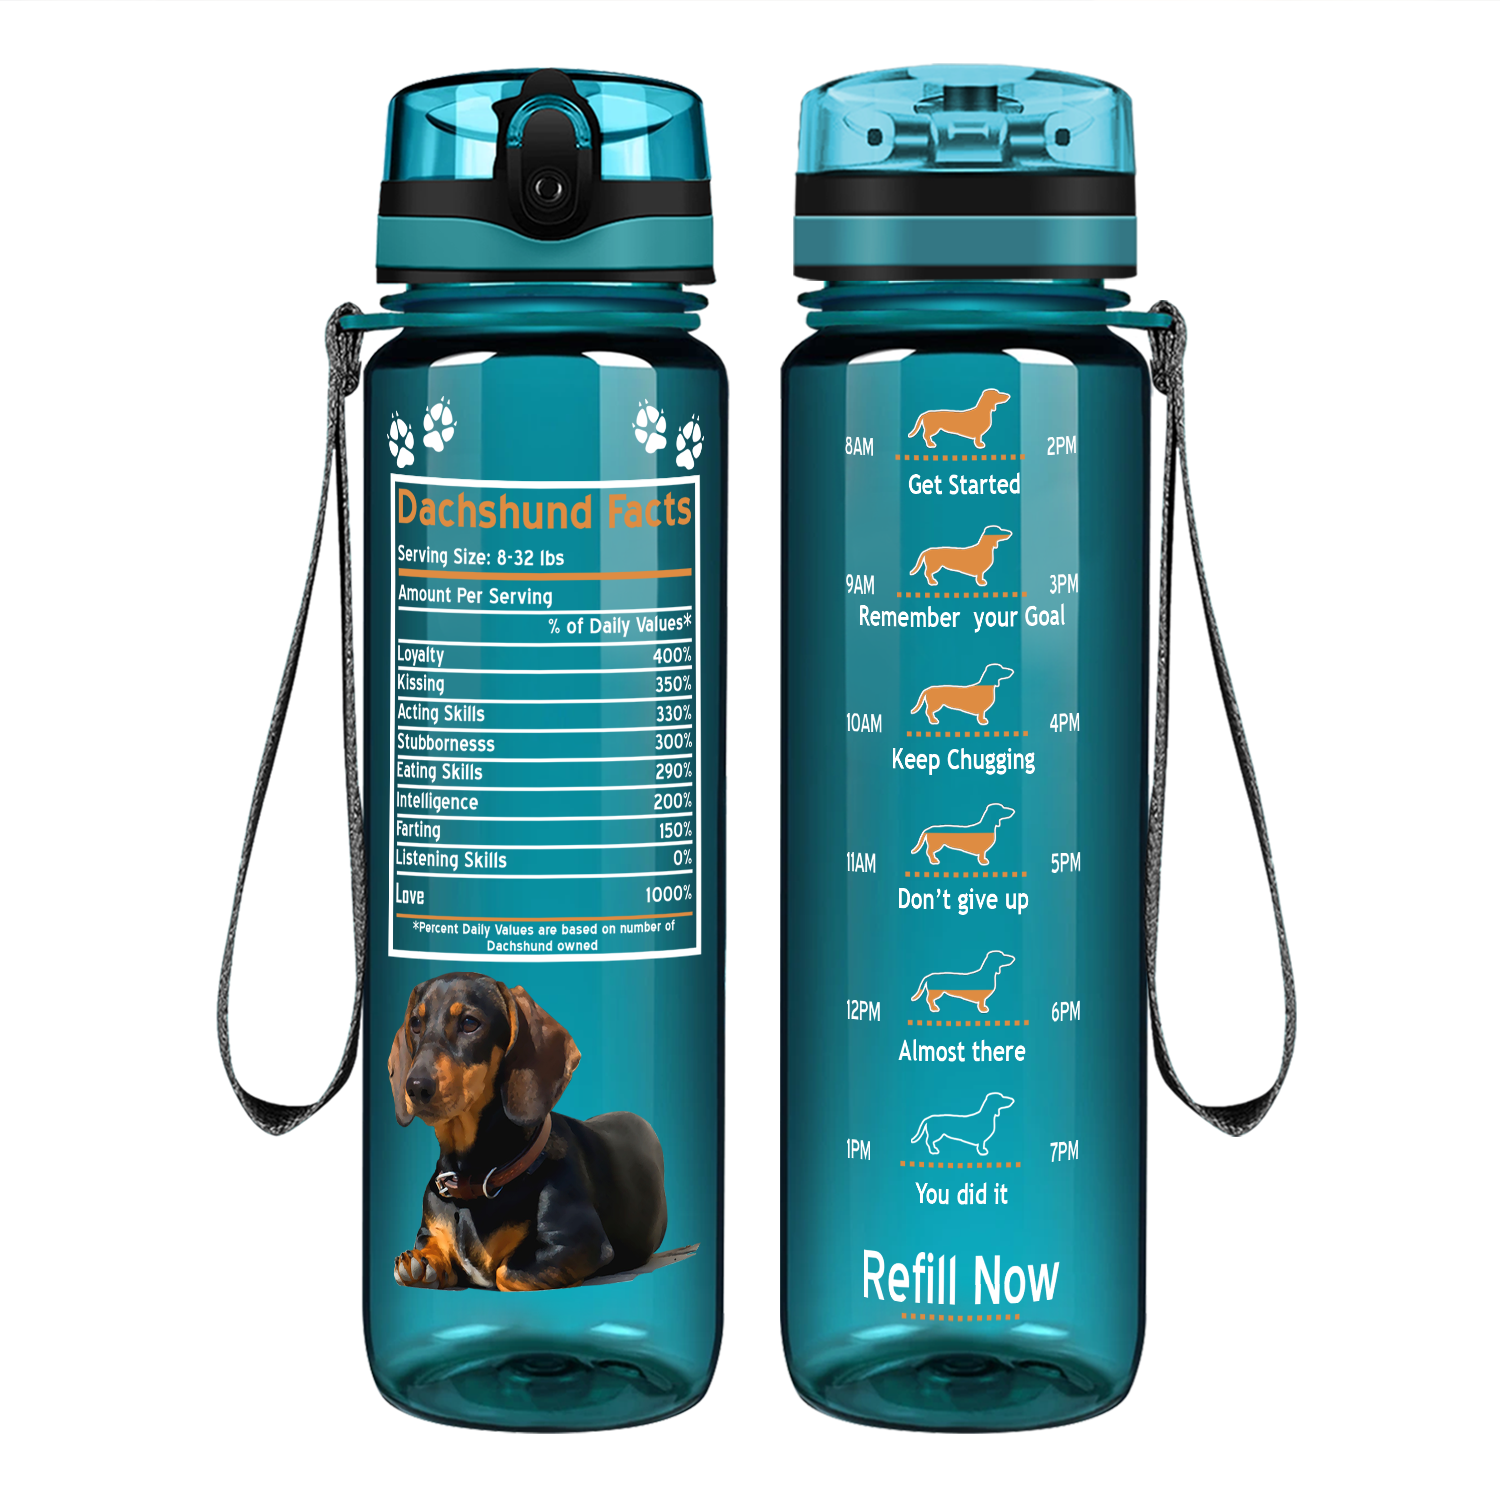 Dachshund Facts on 32 oz Motivational Tracking Water Bottle